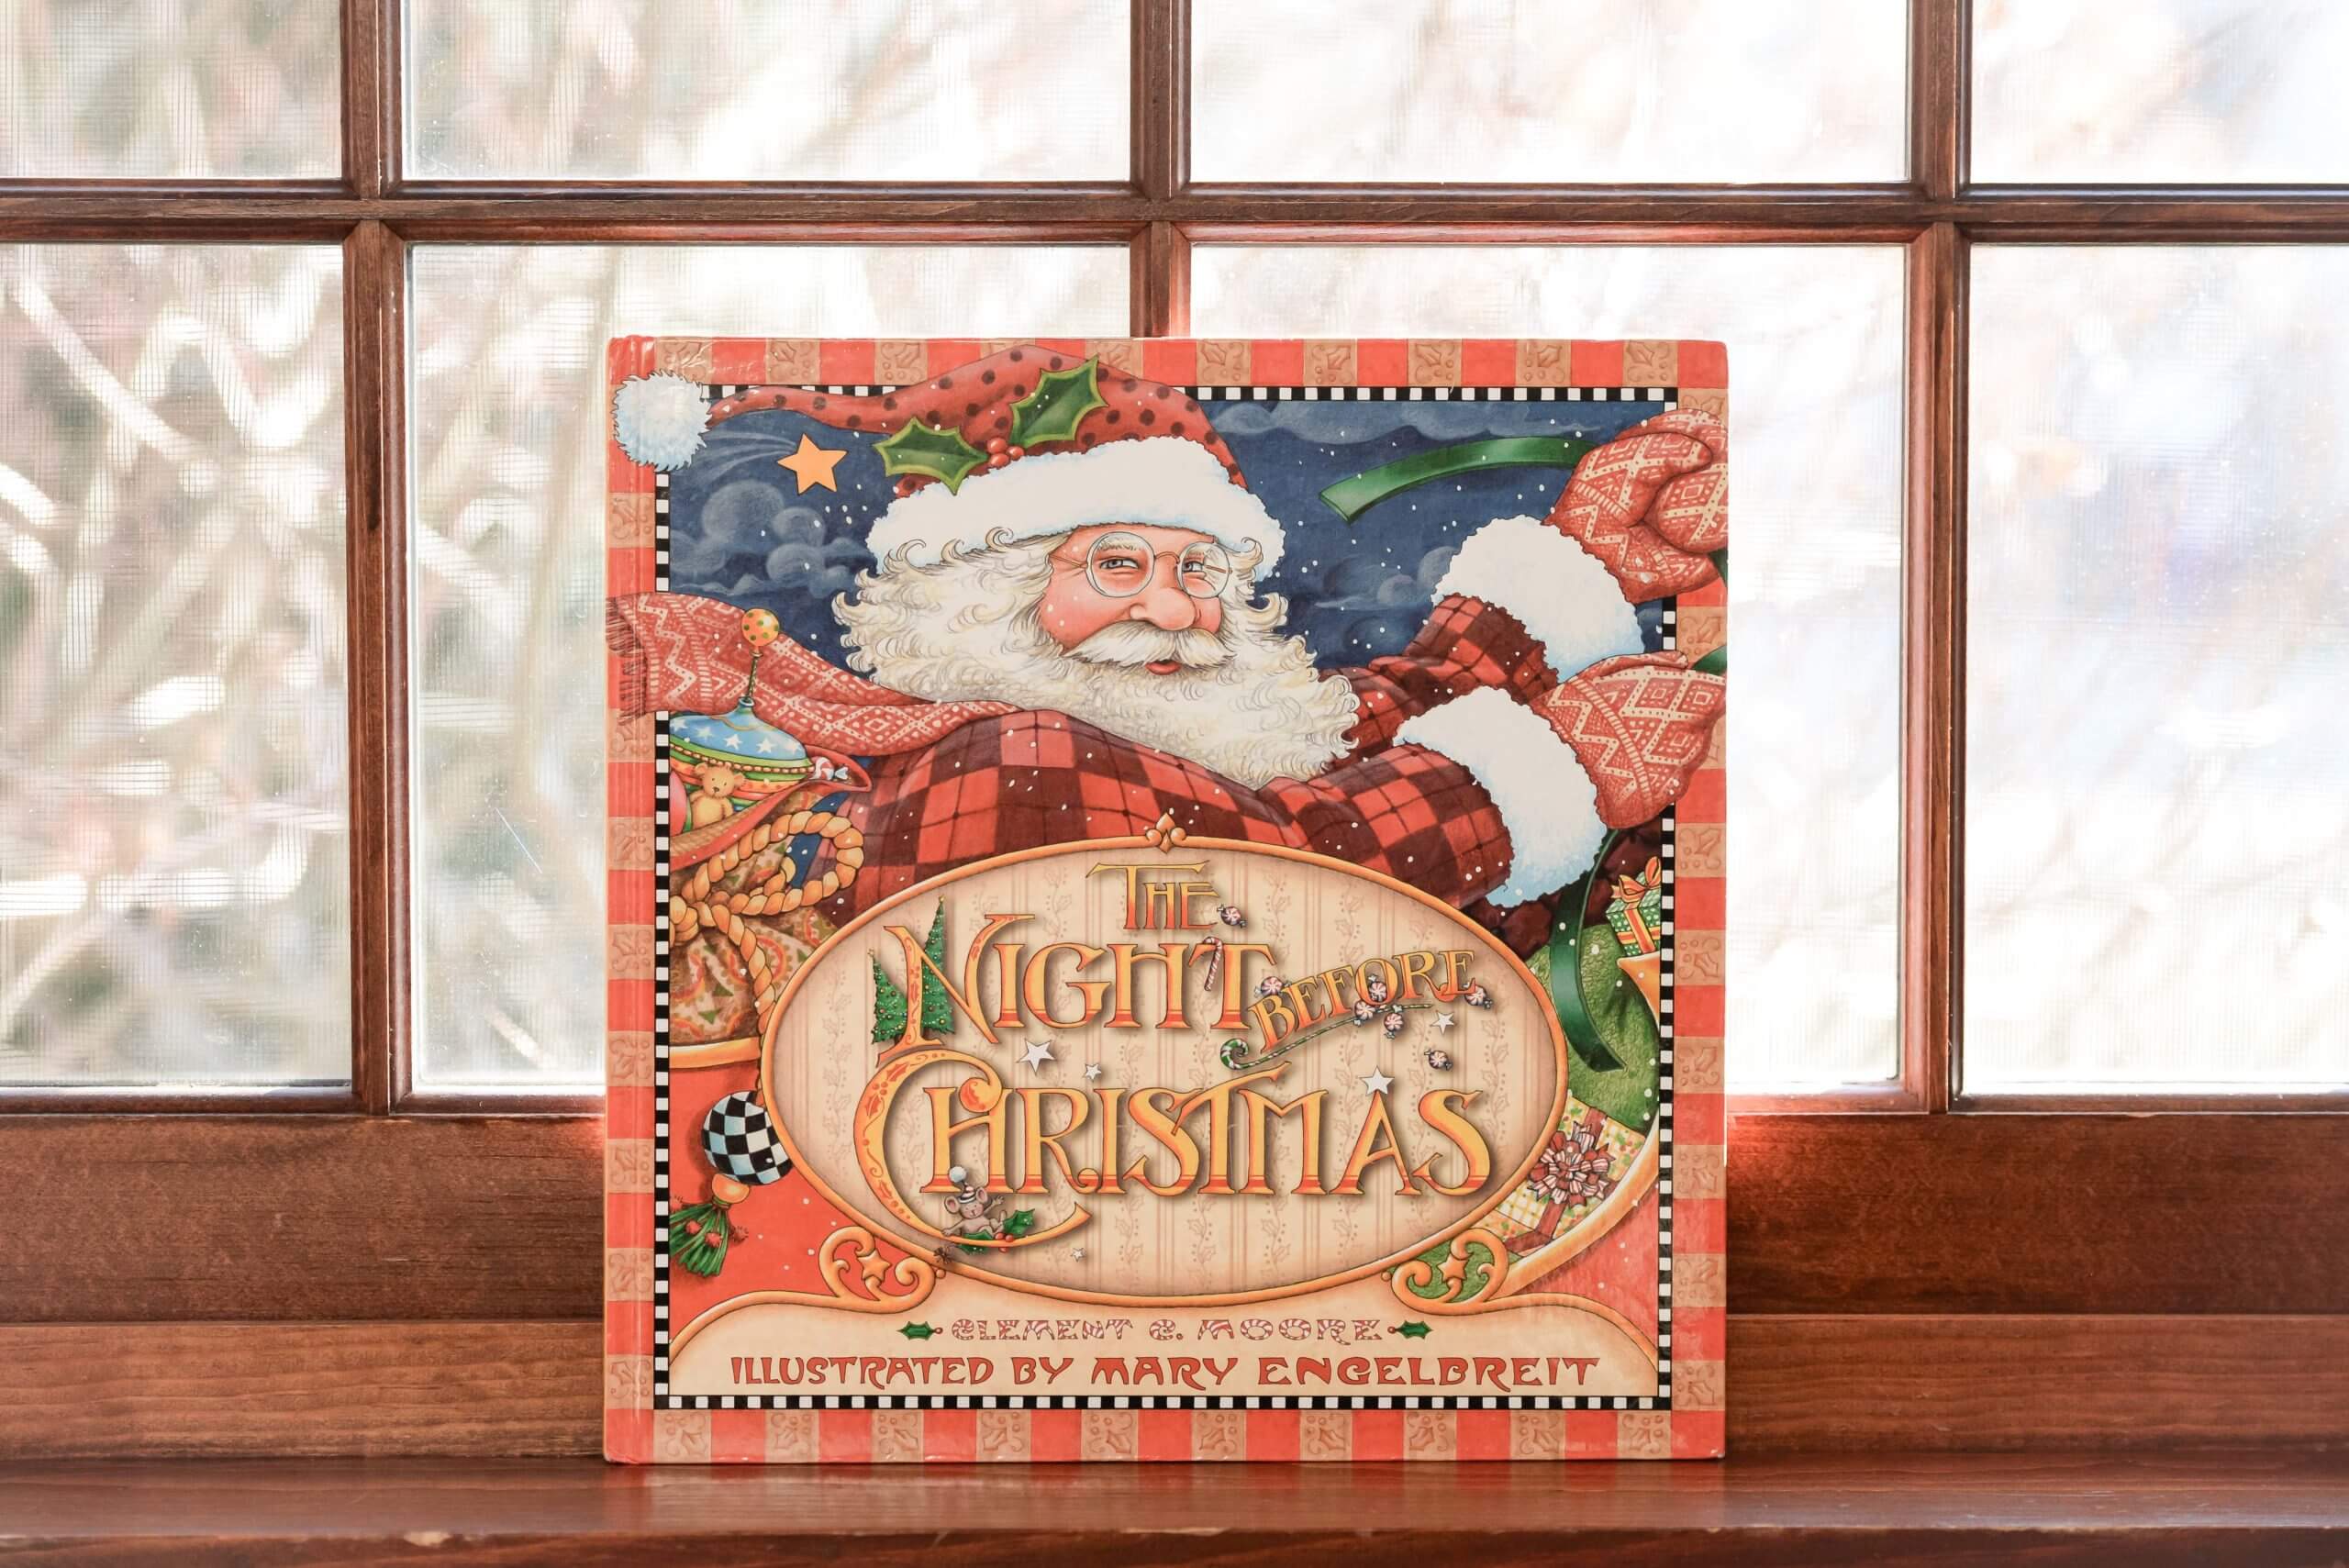 Color photo of The Night Before Christmas book sitting on a window ledge. The book is illustrated by Mary Engelbreit